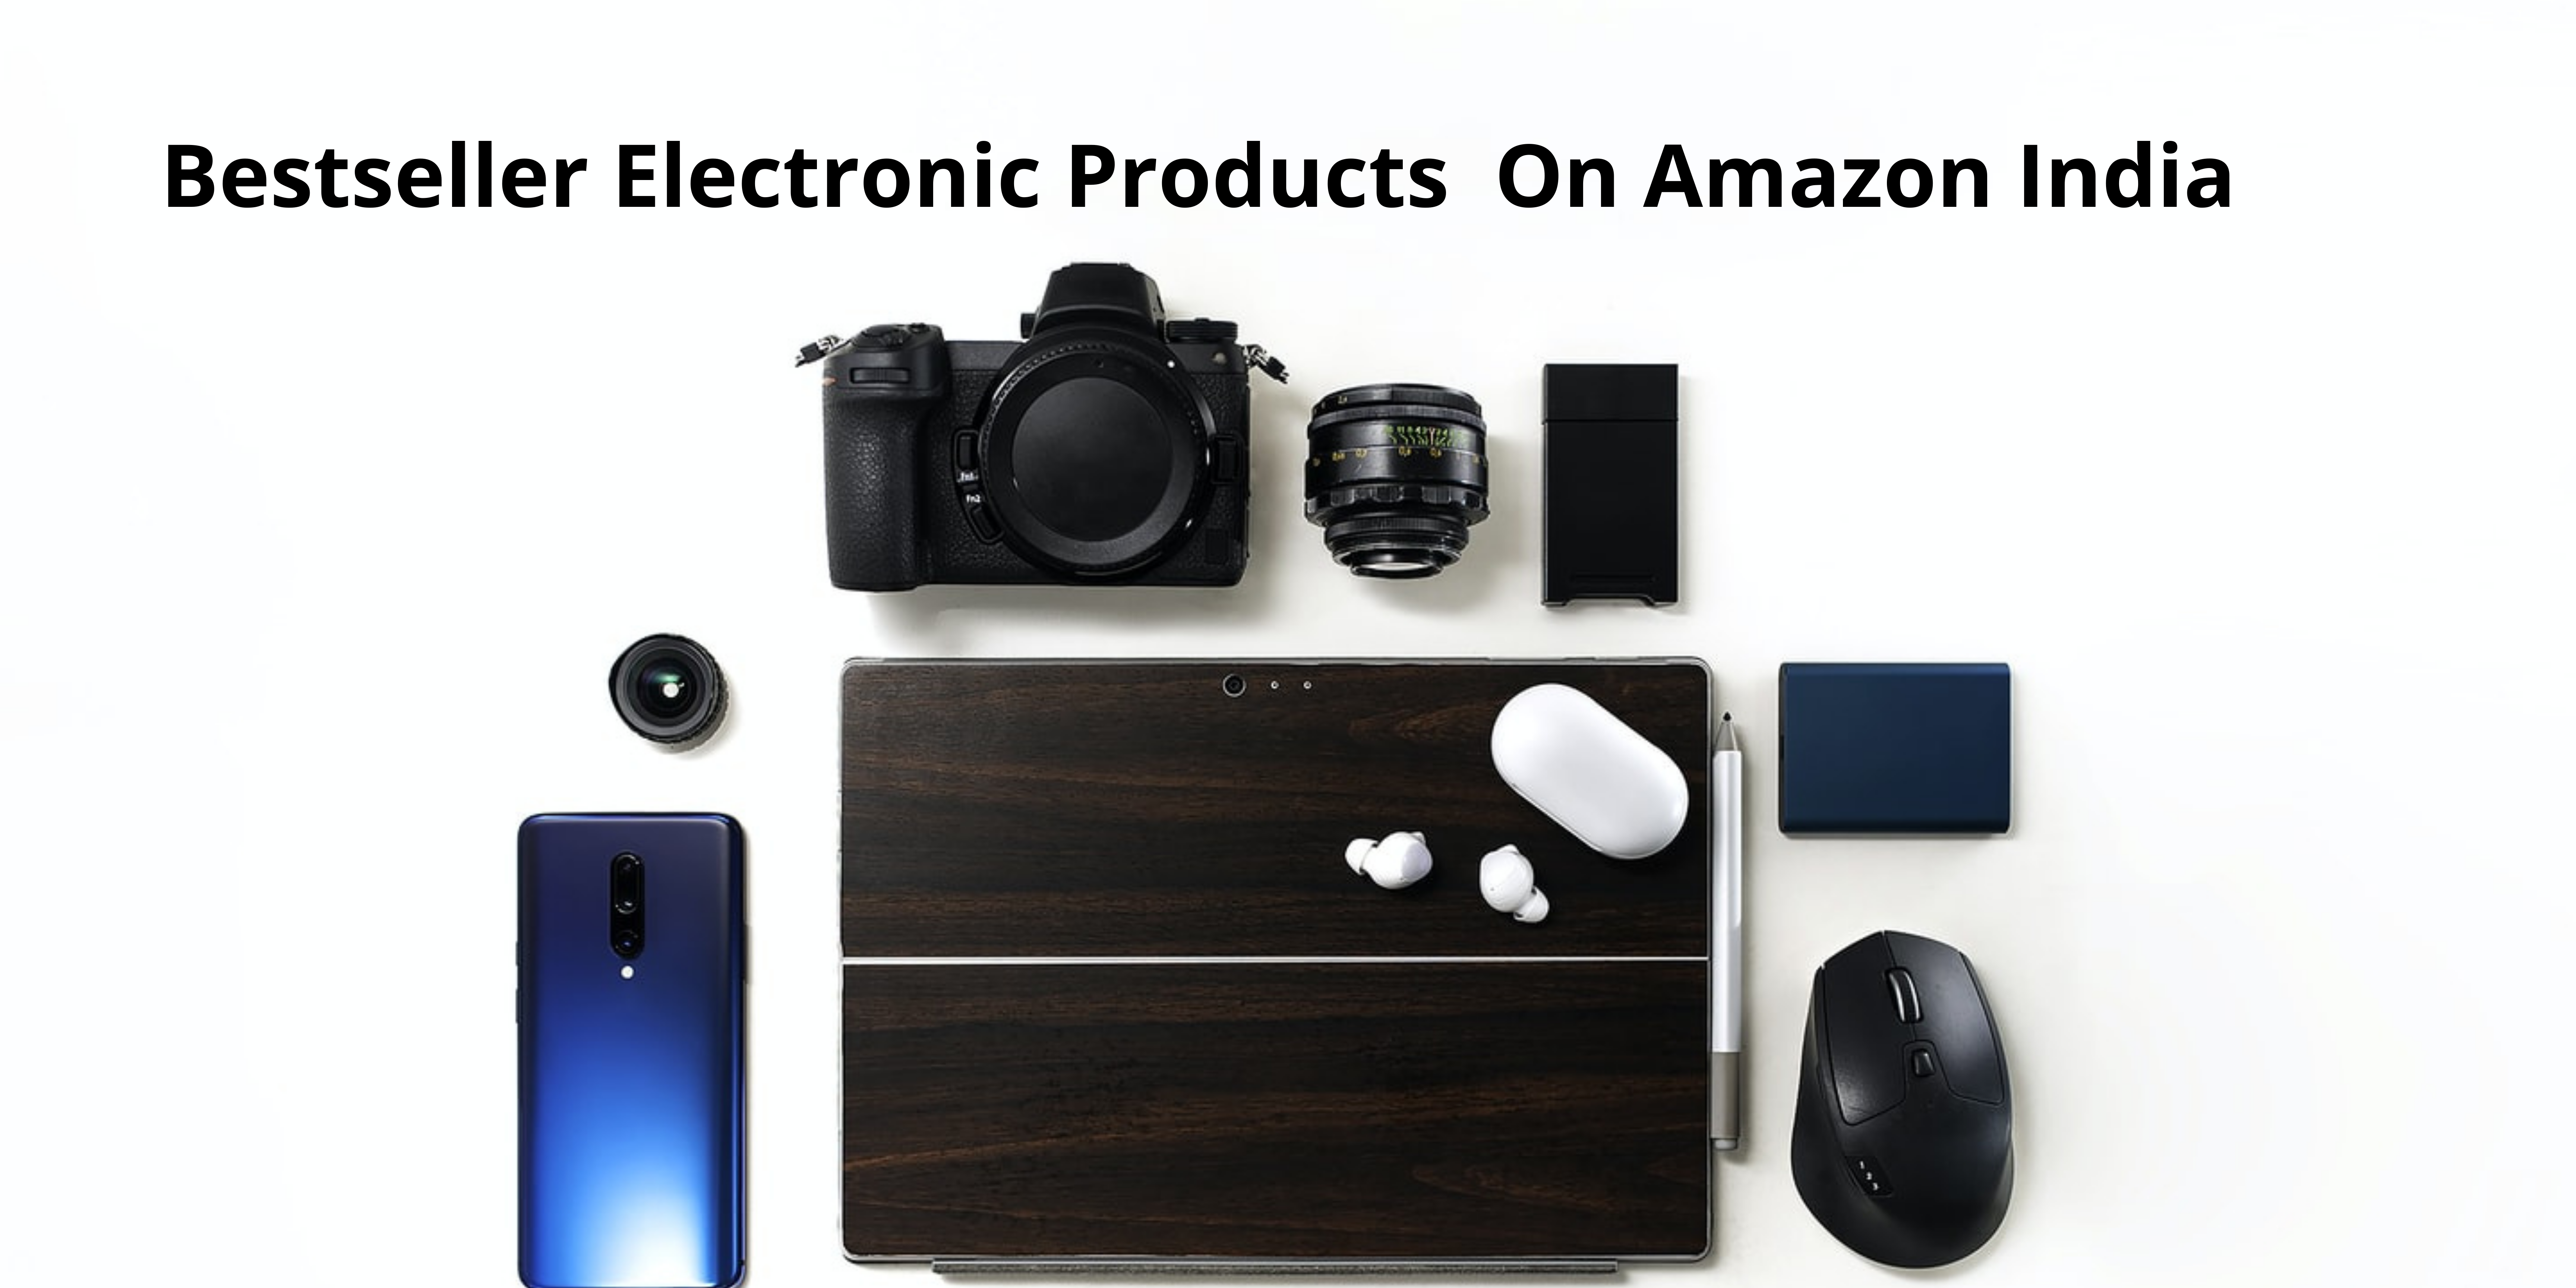 Top Electronic Products on Amazon India